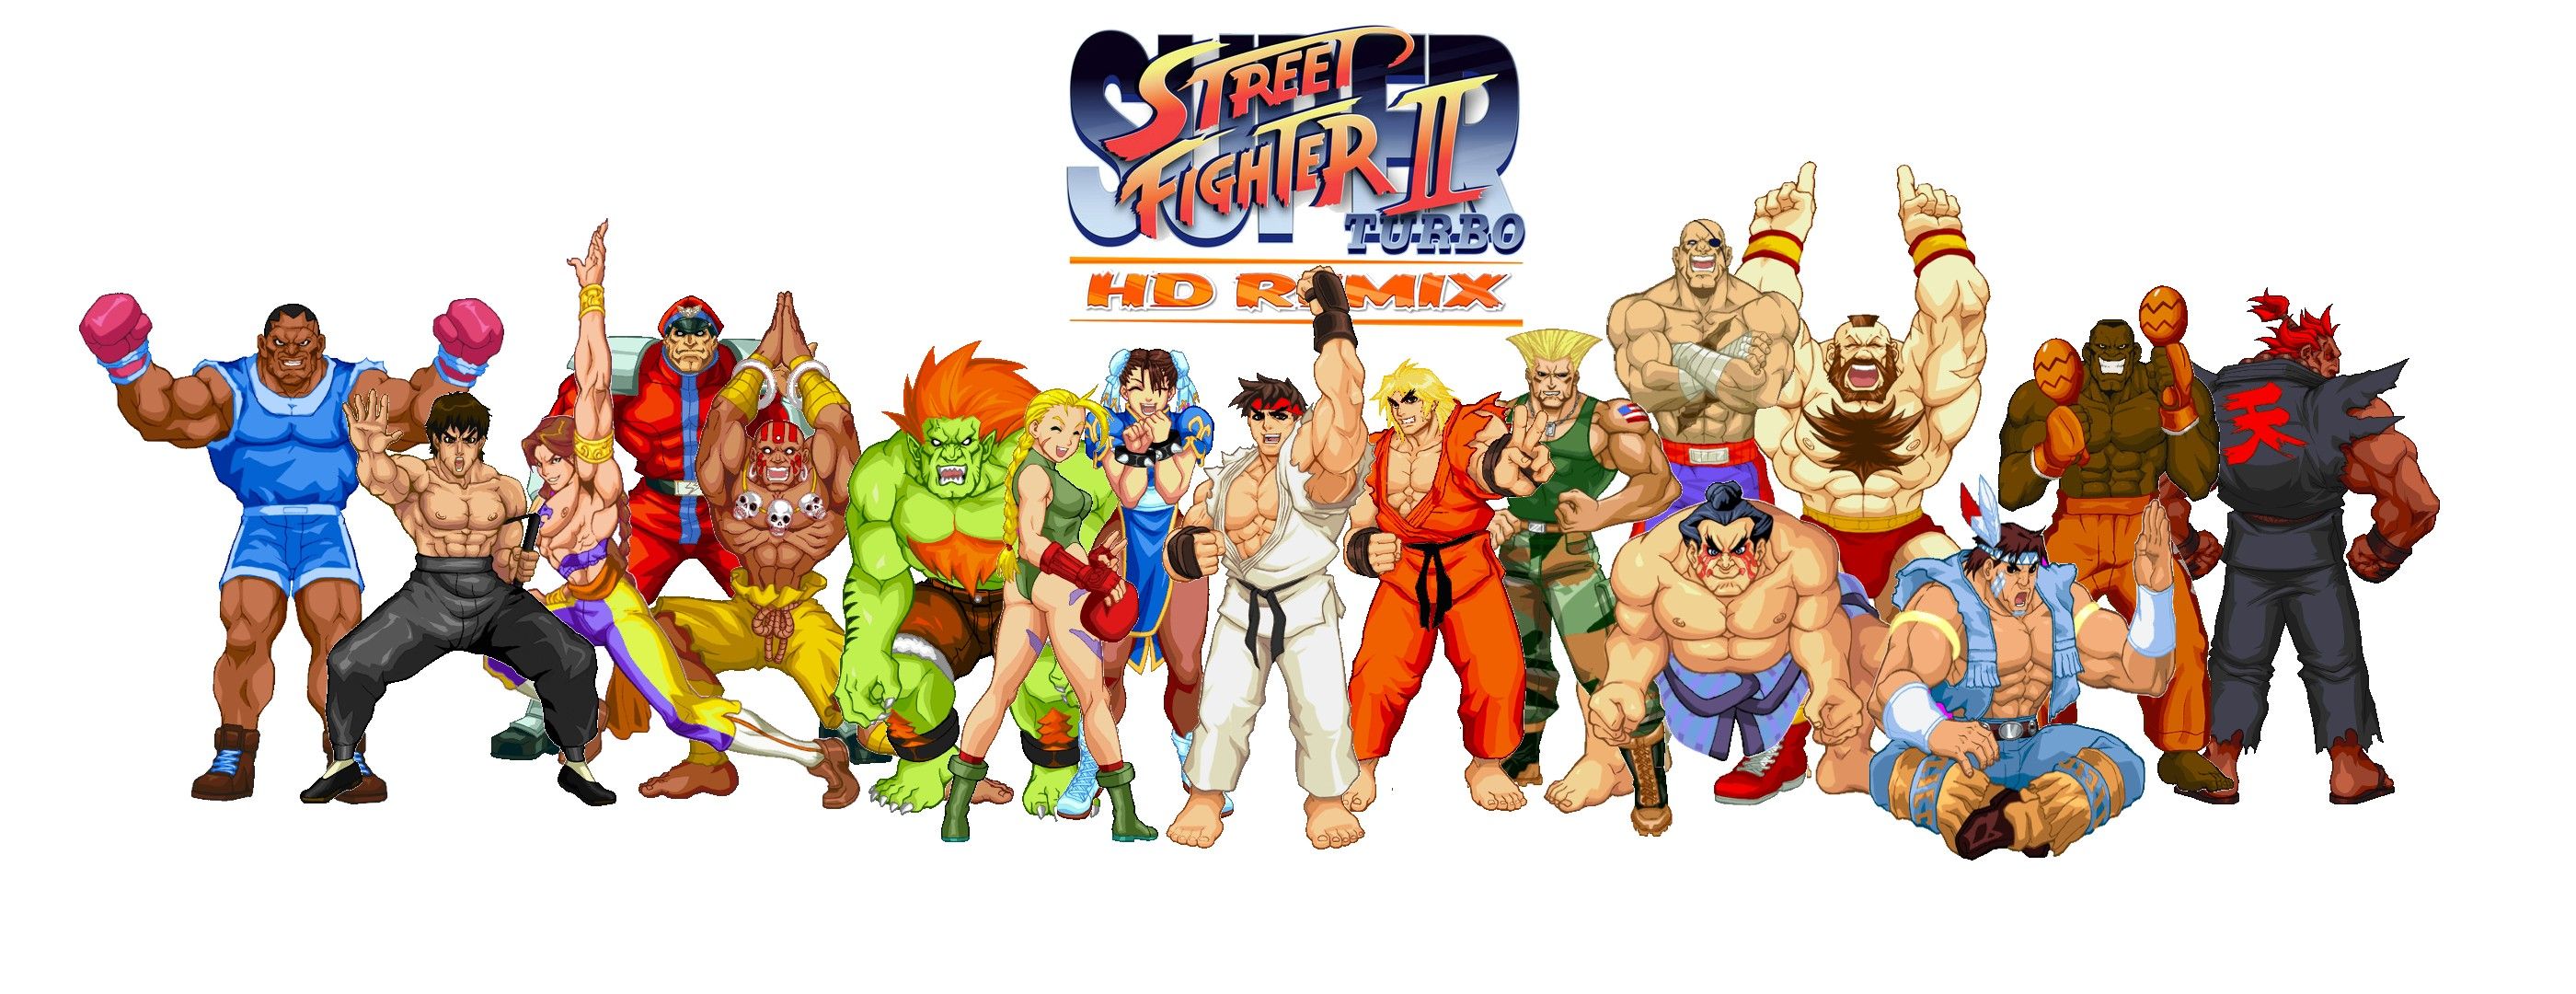 SF2 World Warriors. Who has more chances? Fighter V